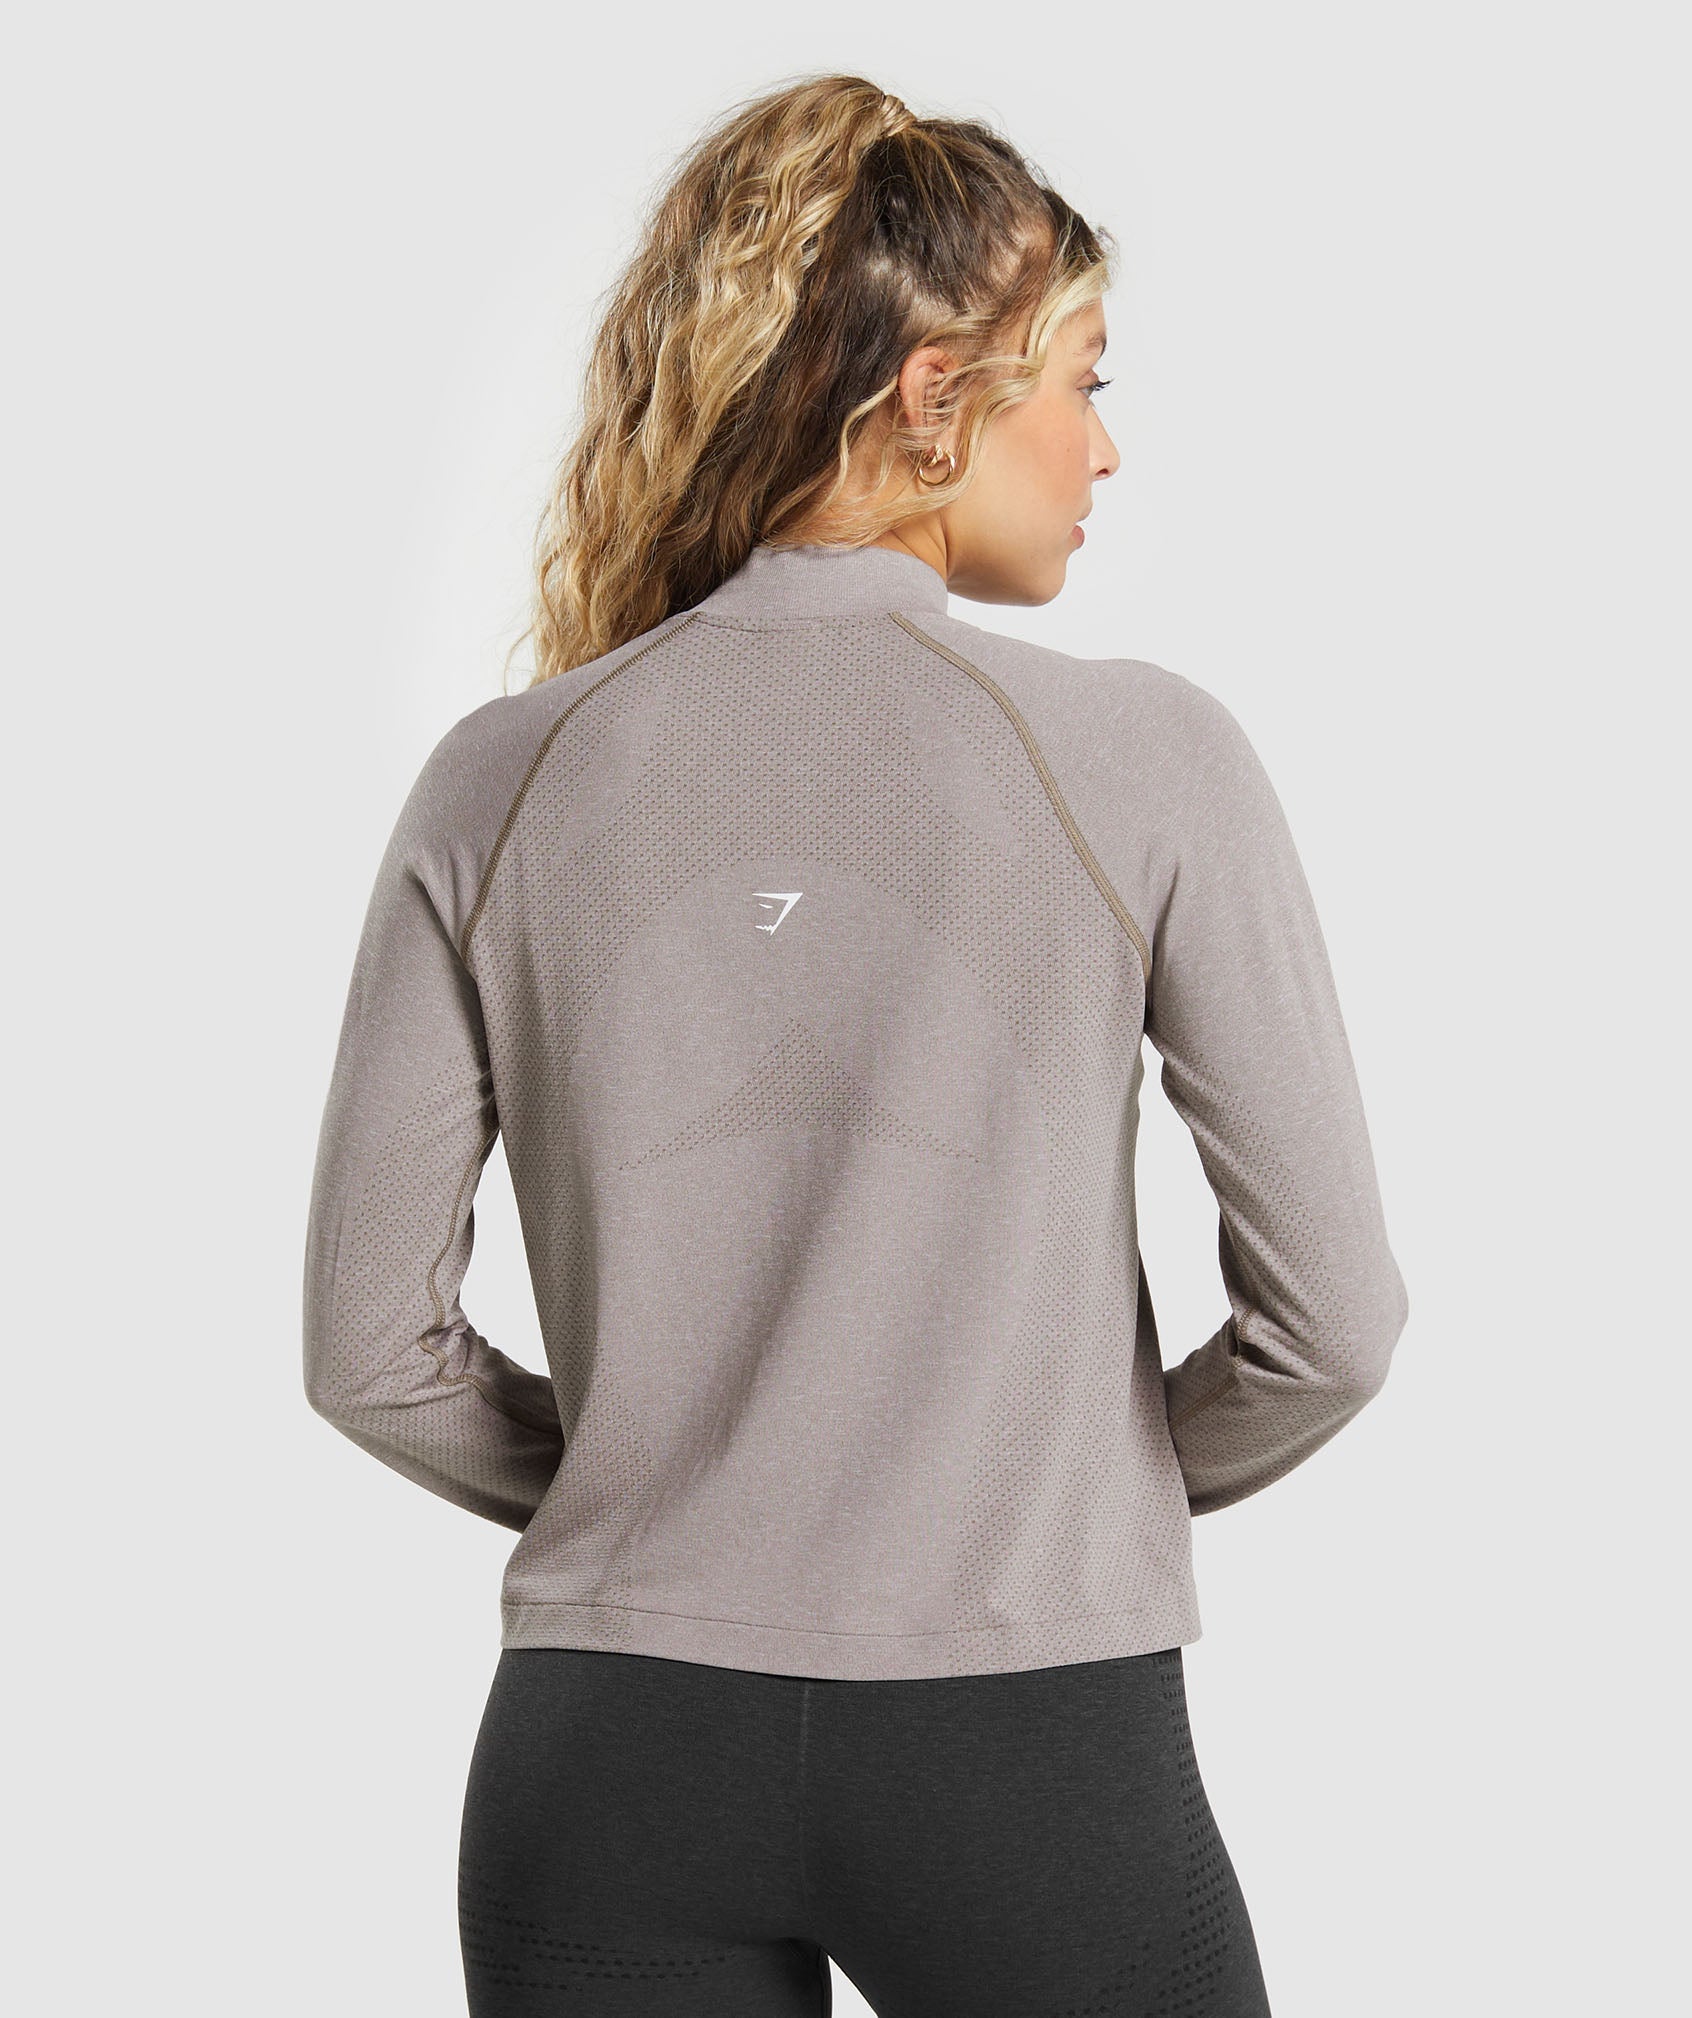 Vital Seamless 2.0 1/4 Zip in Warm Taupe Marl - view 2